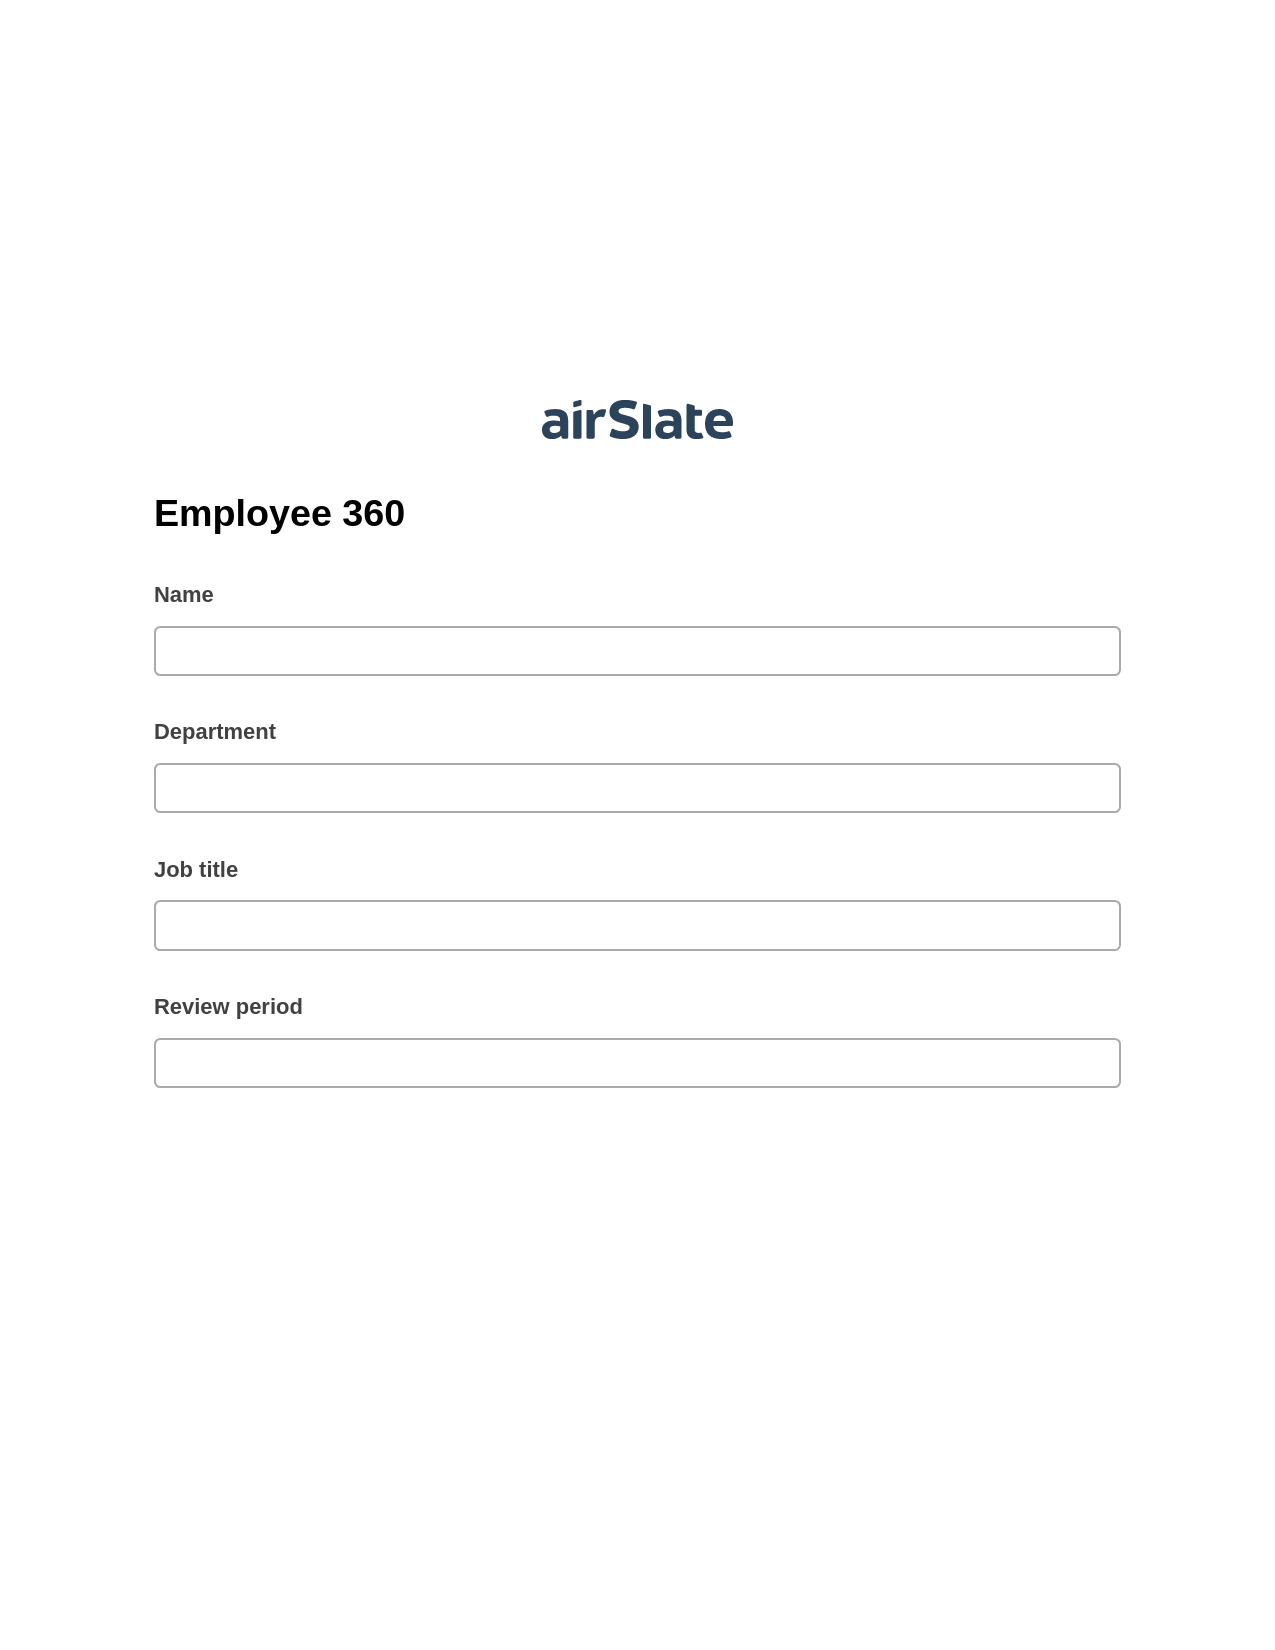 Multirole Employee 360 Pre-fill from MS Dynamics 365 Records, Email Notification Bot, Archive to Dropbox Bot